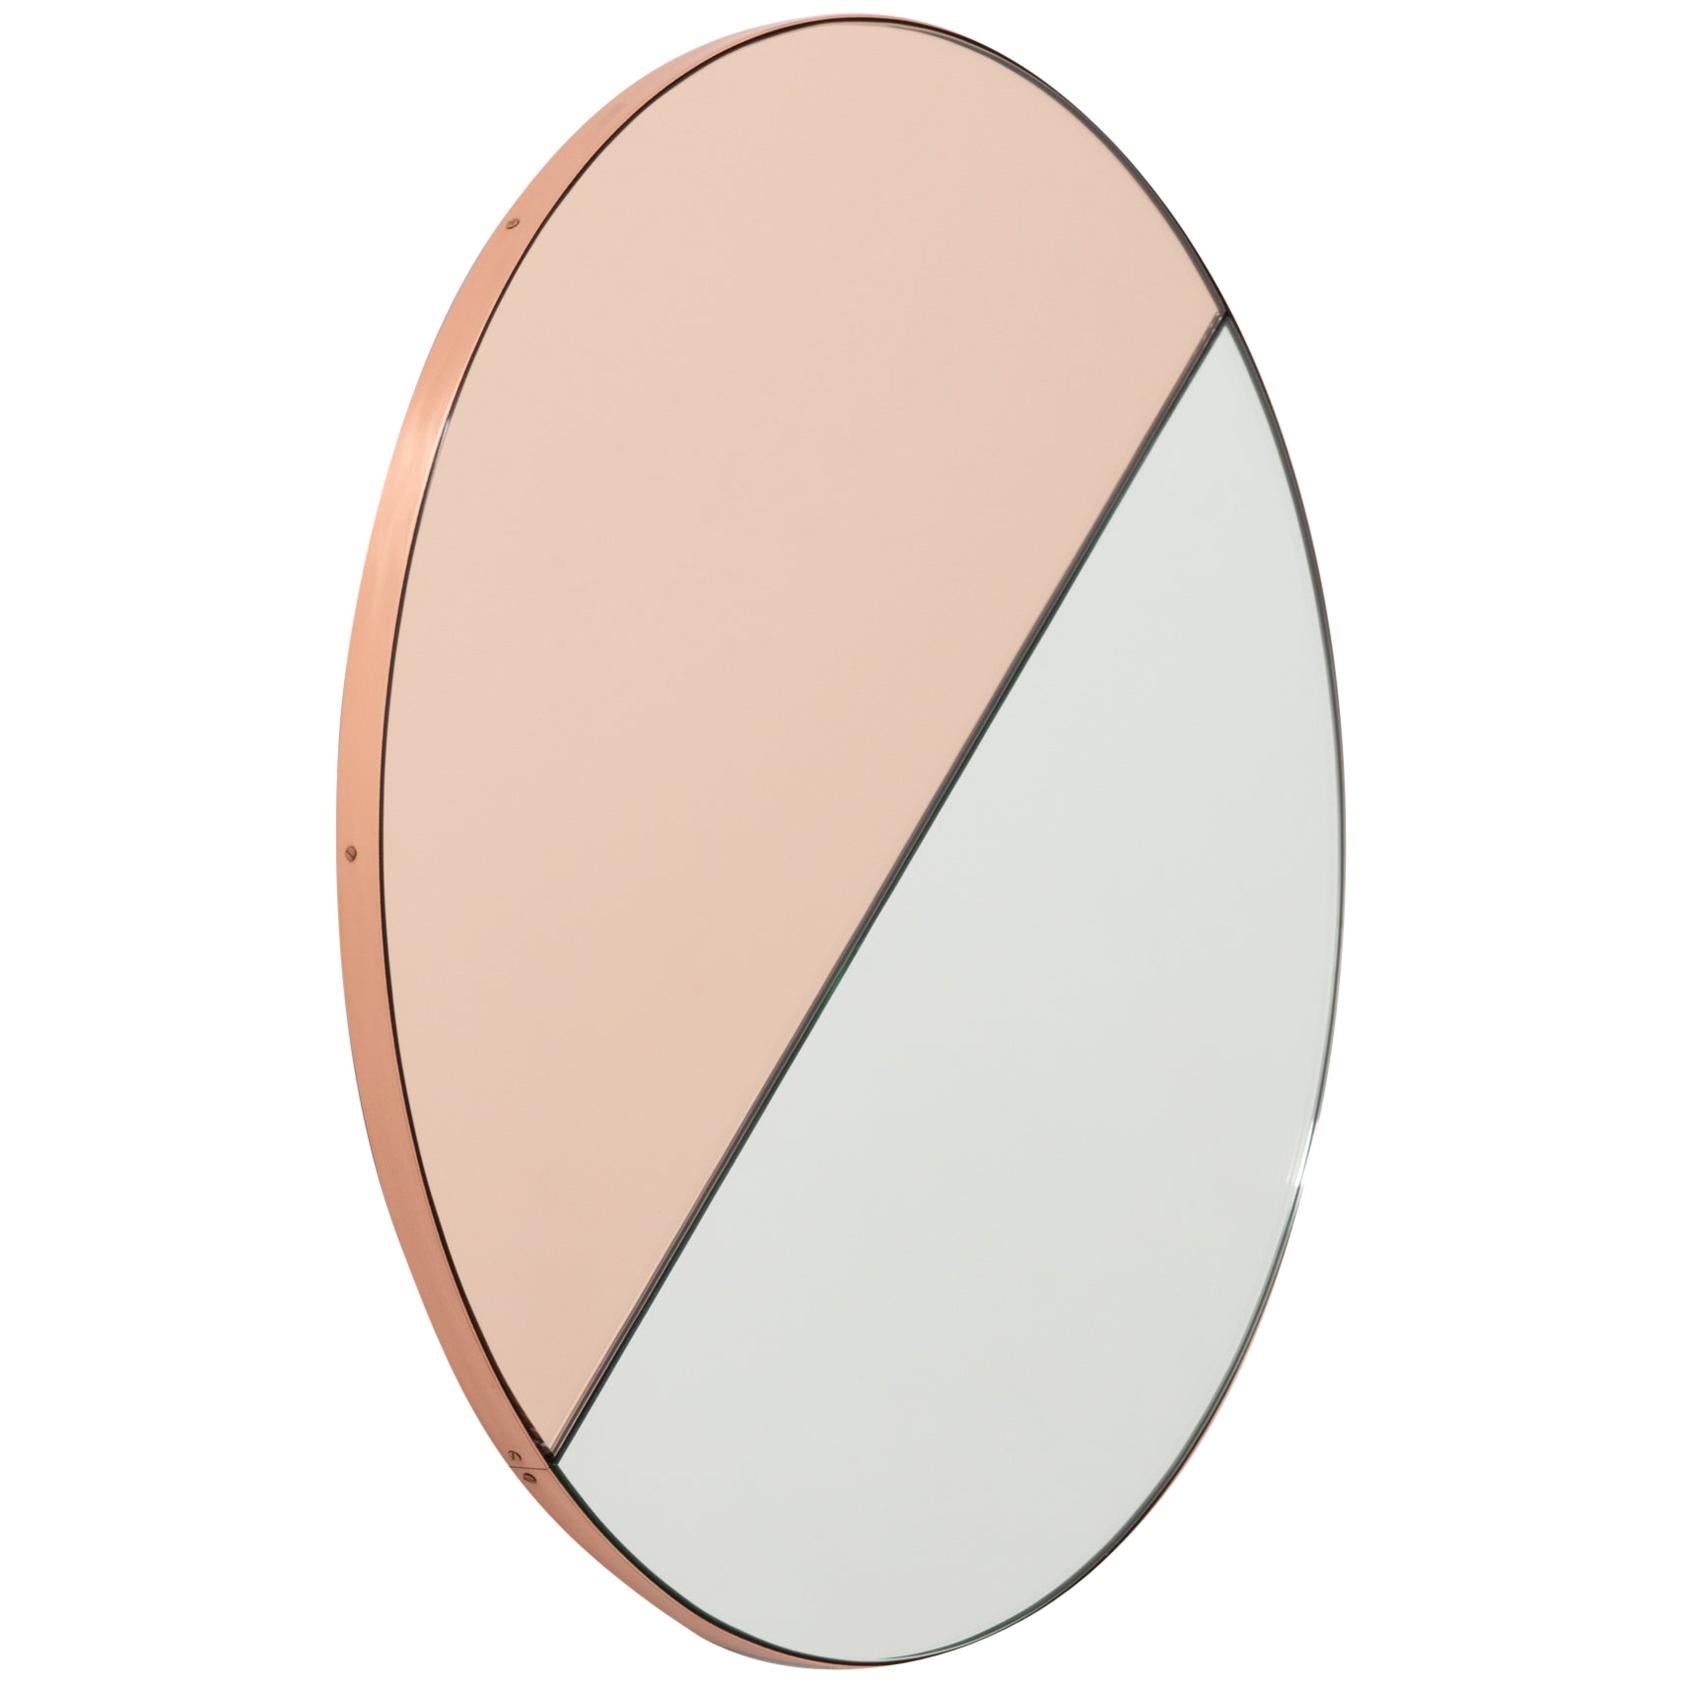 In Stock Orbis Dualis Peach Silver Round Mirror with Copper Frame, Medium For Sale